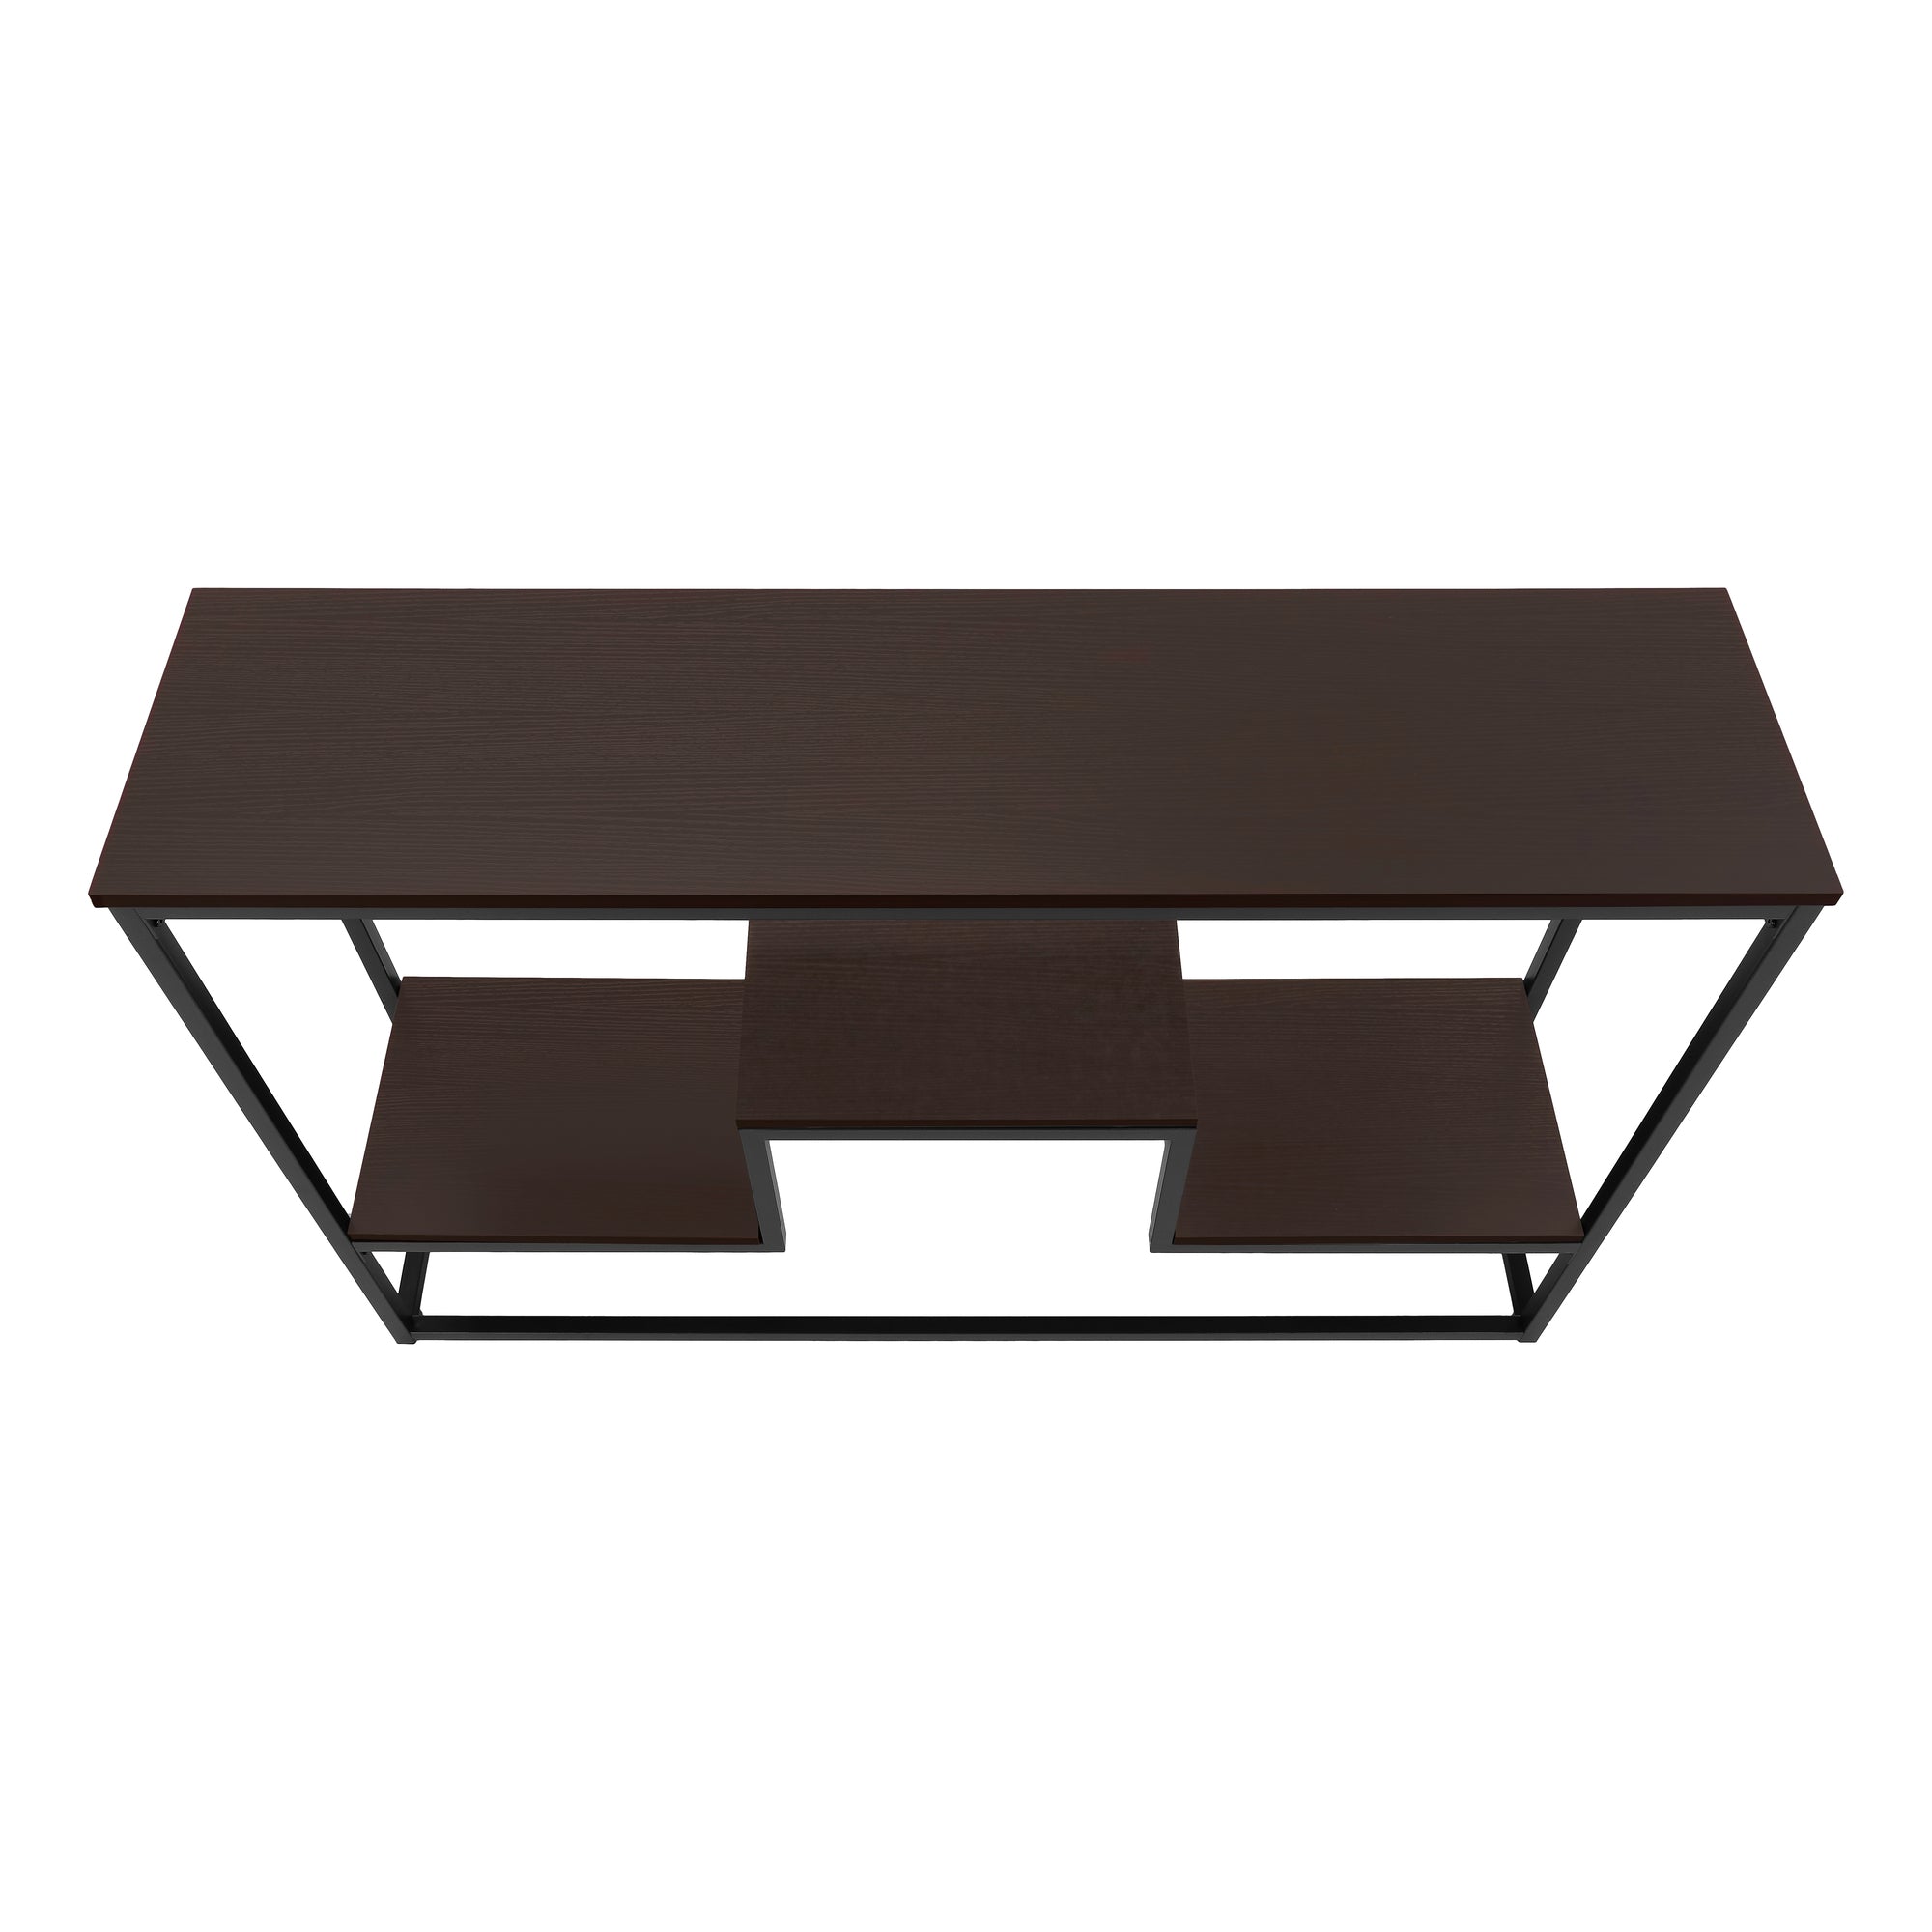 MN-453582    Accent Table, Console, Entryway, Narrow, Sofa, Living Room, Bedroom, Metal Frame, Laminate, Dark Brown, Black, Contemporary, Modern